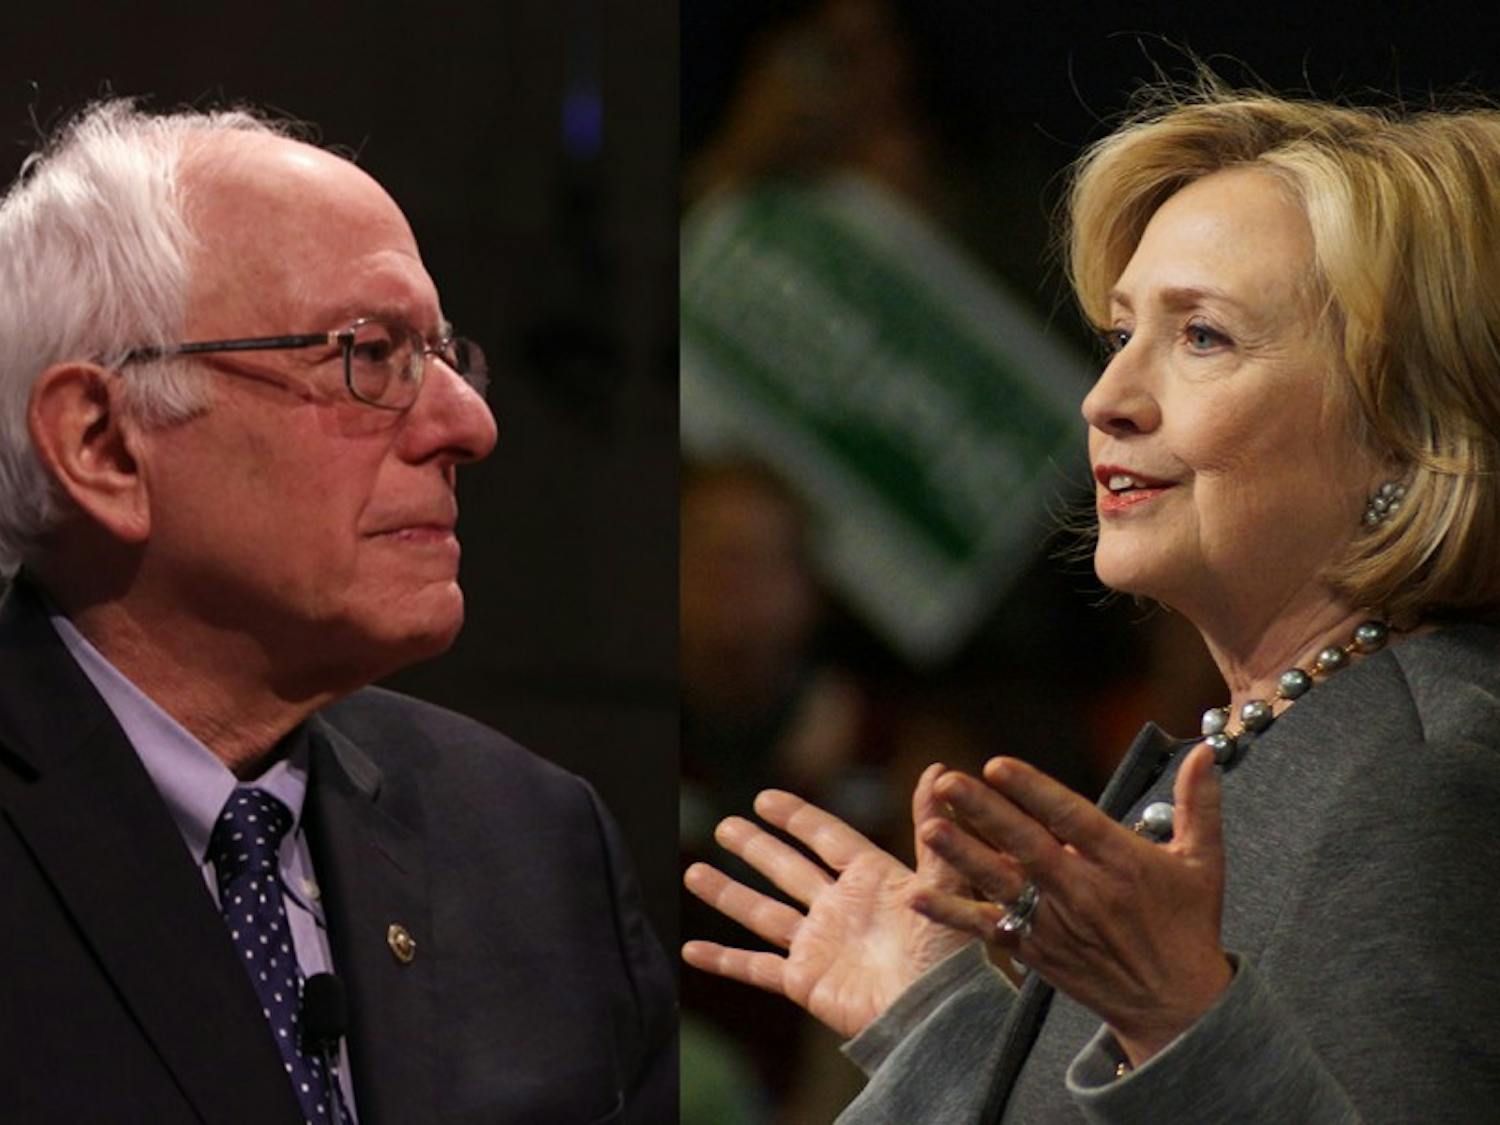 Sen. Sanders and former Secretary of State Clinton have very different financial supporters.